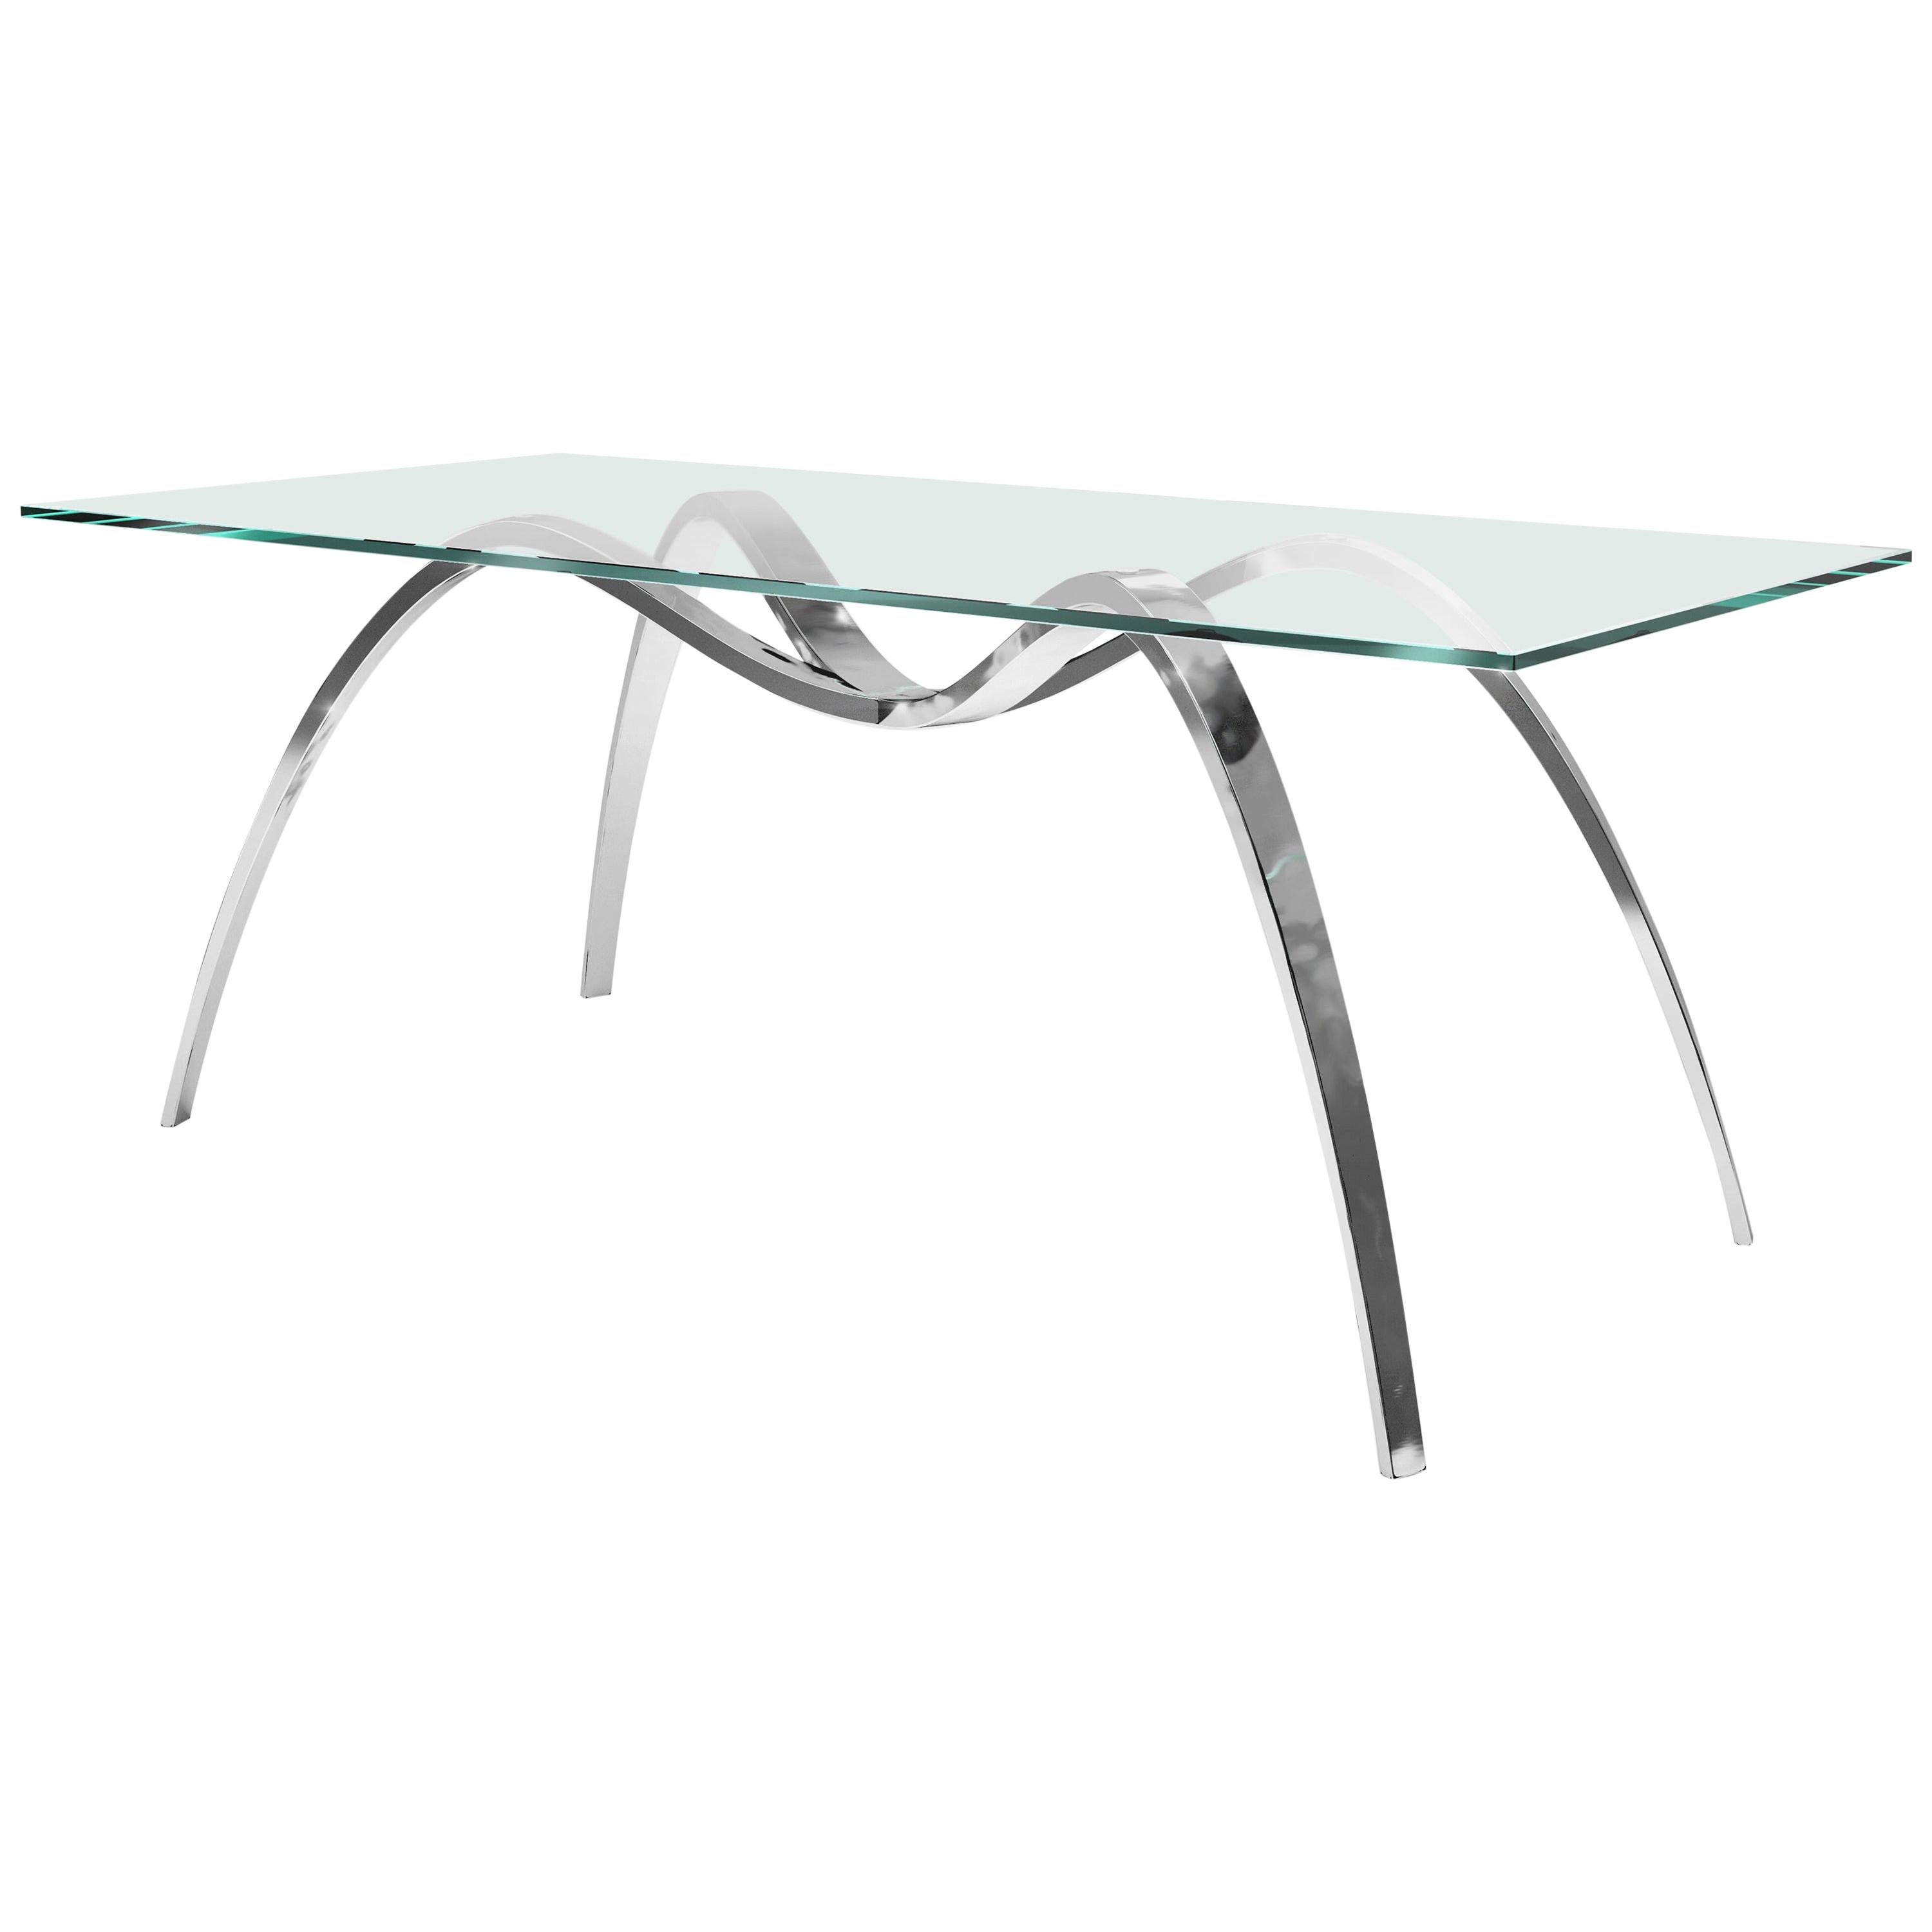 The 'Spider Classic Small' dining table is made of mirror polished stainless and tabletop in extra-clear crystal glass.

Dining table dimension: L 190 x W 90 x H 75cm. Dimensions are customizable.

Limited Edition of 15.

Each table is hand signed